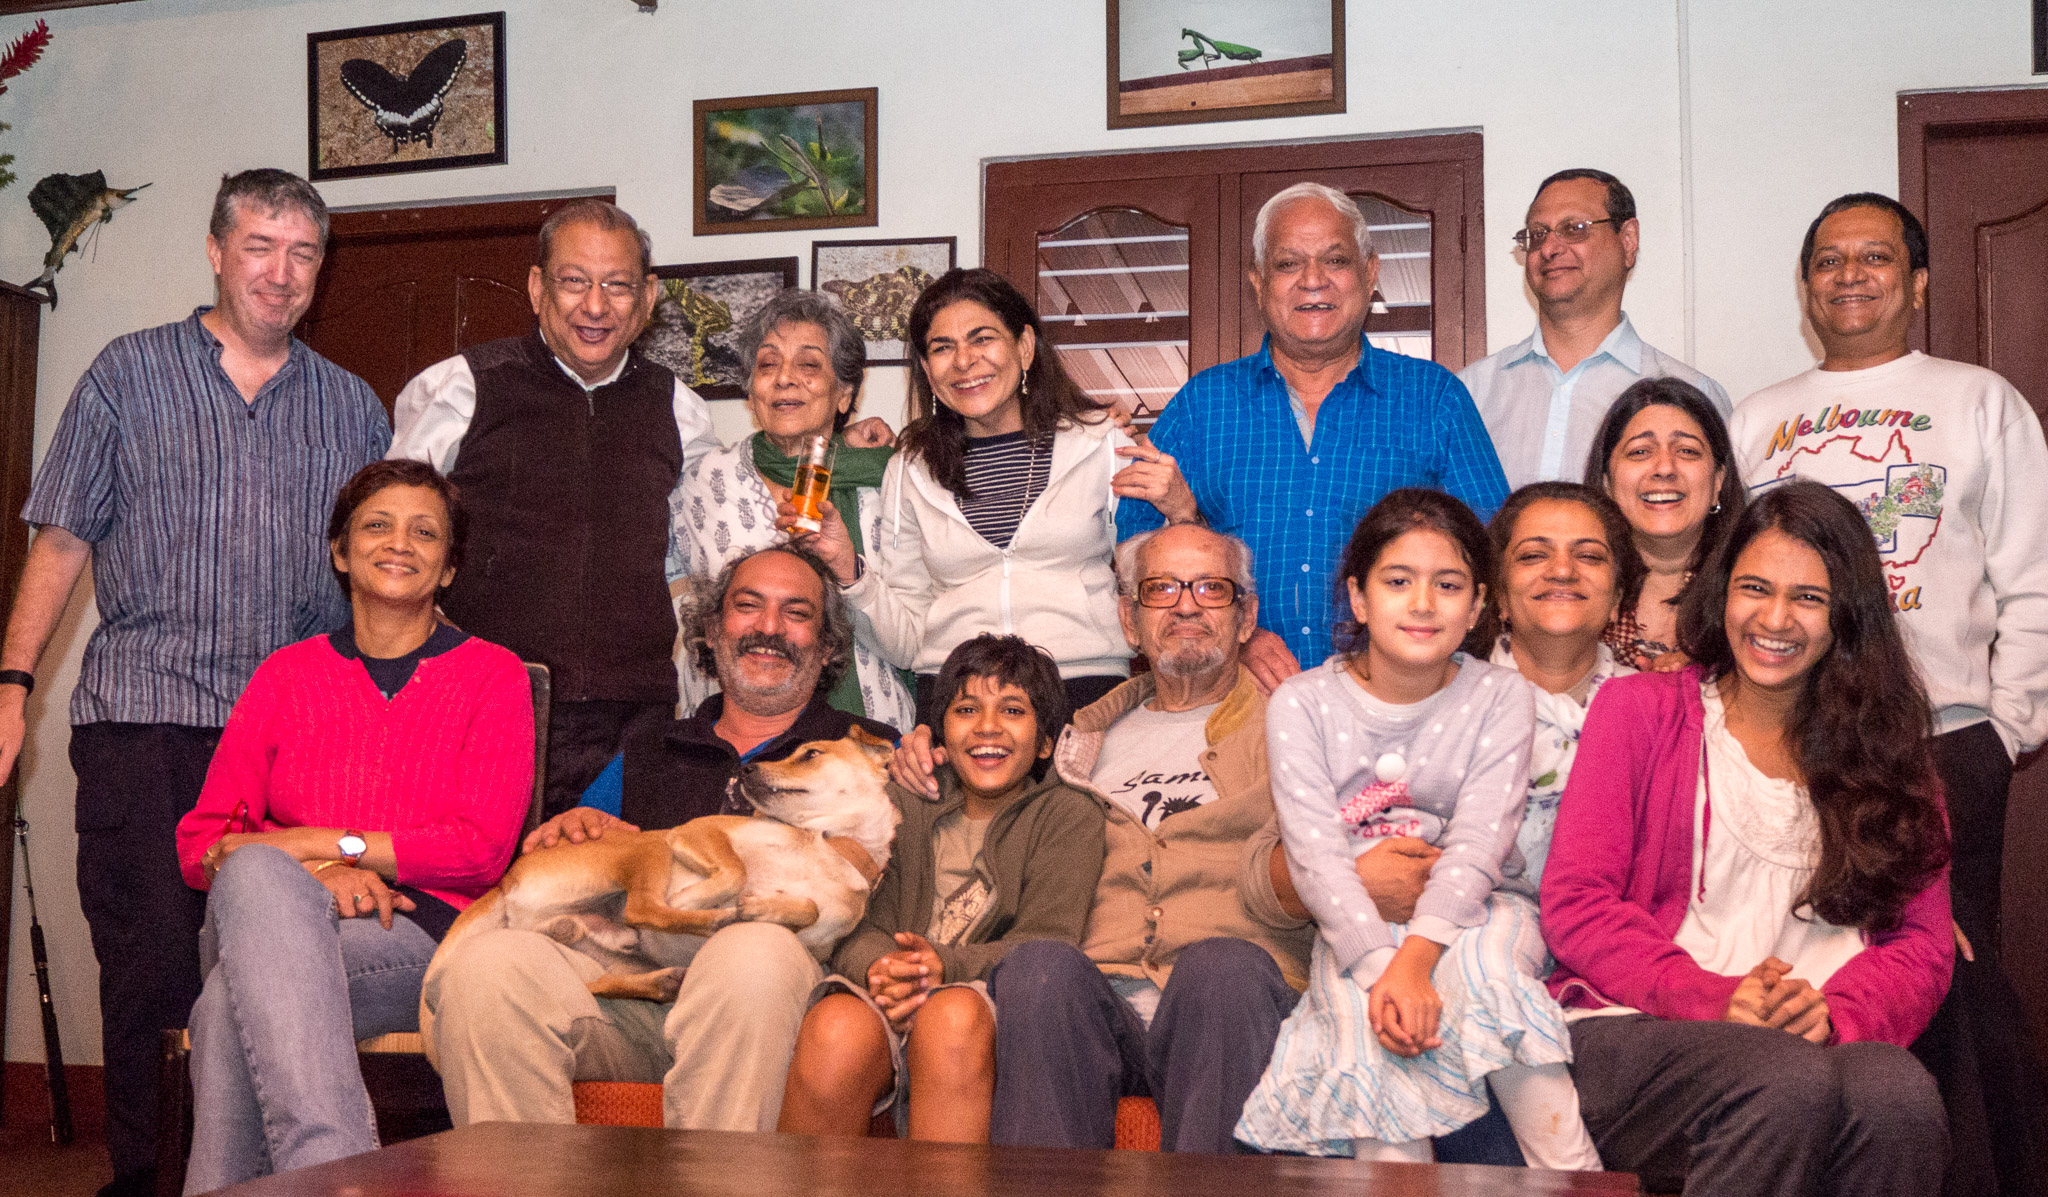 Four generations of S P Chaube's offspring including individuals ranging in age from approximately 10 years old to approximately 90.